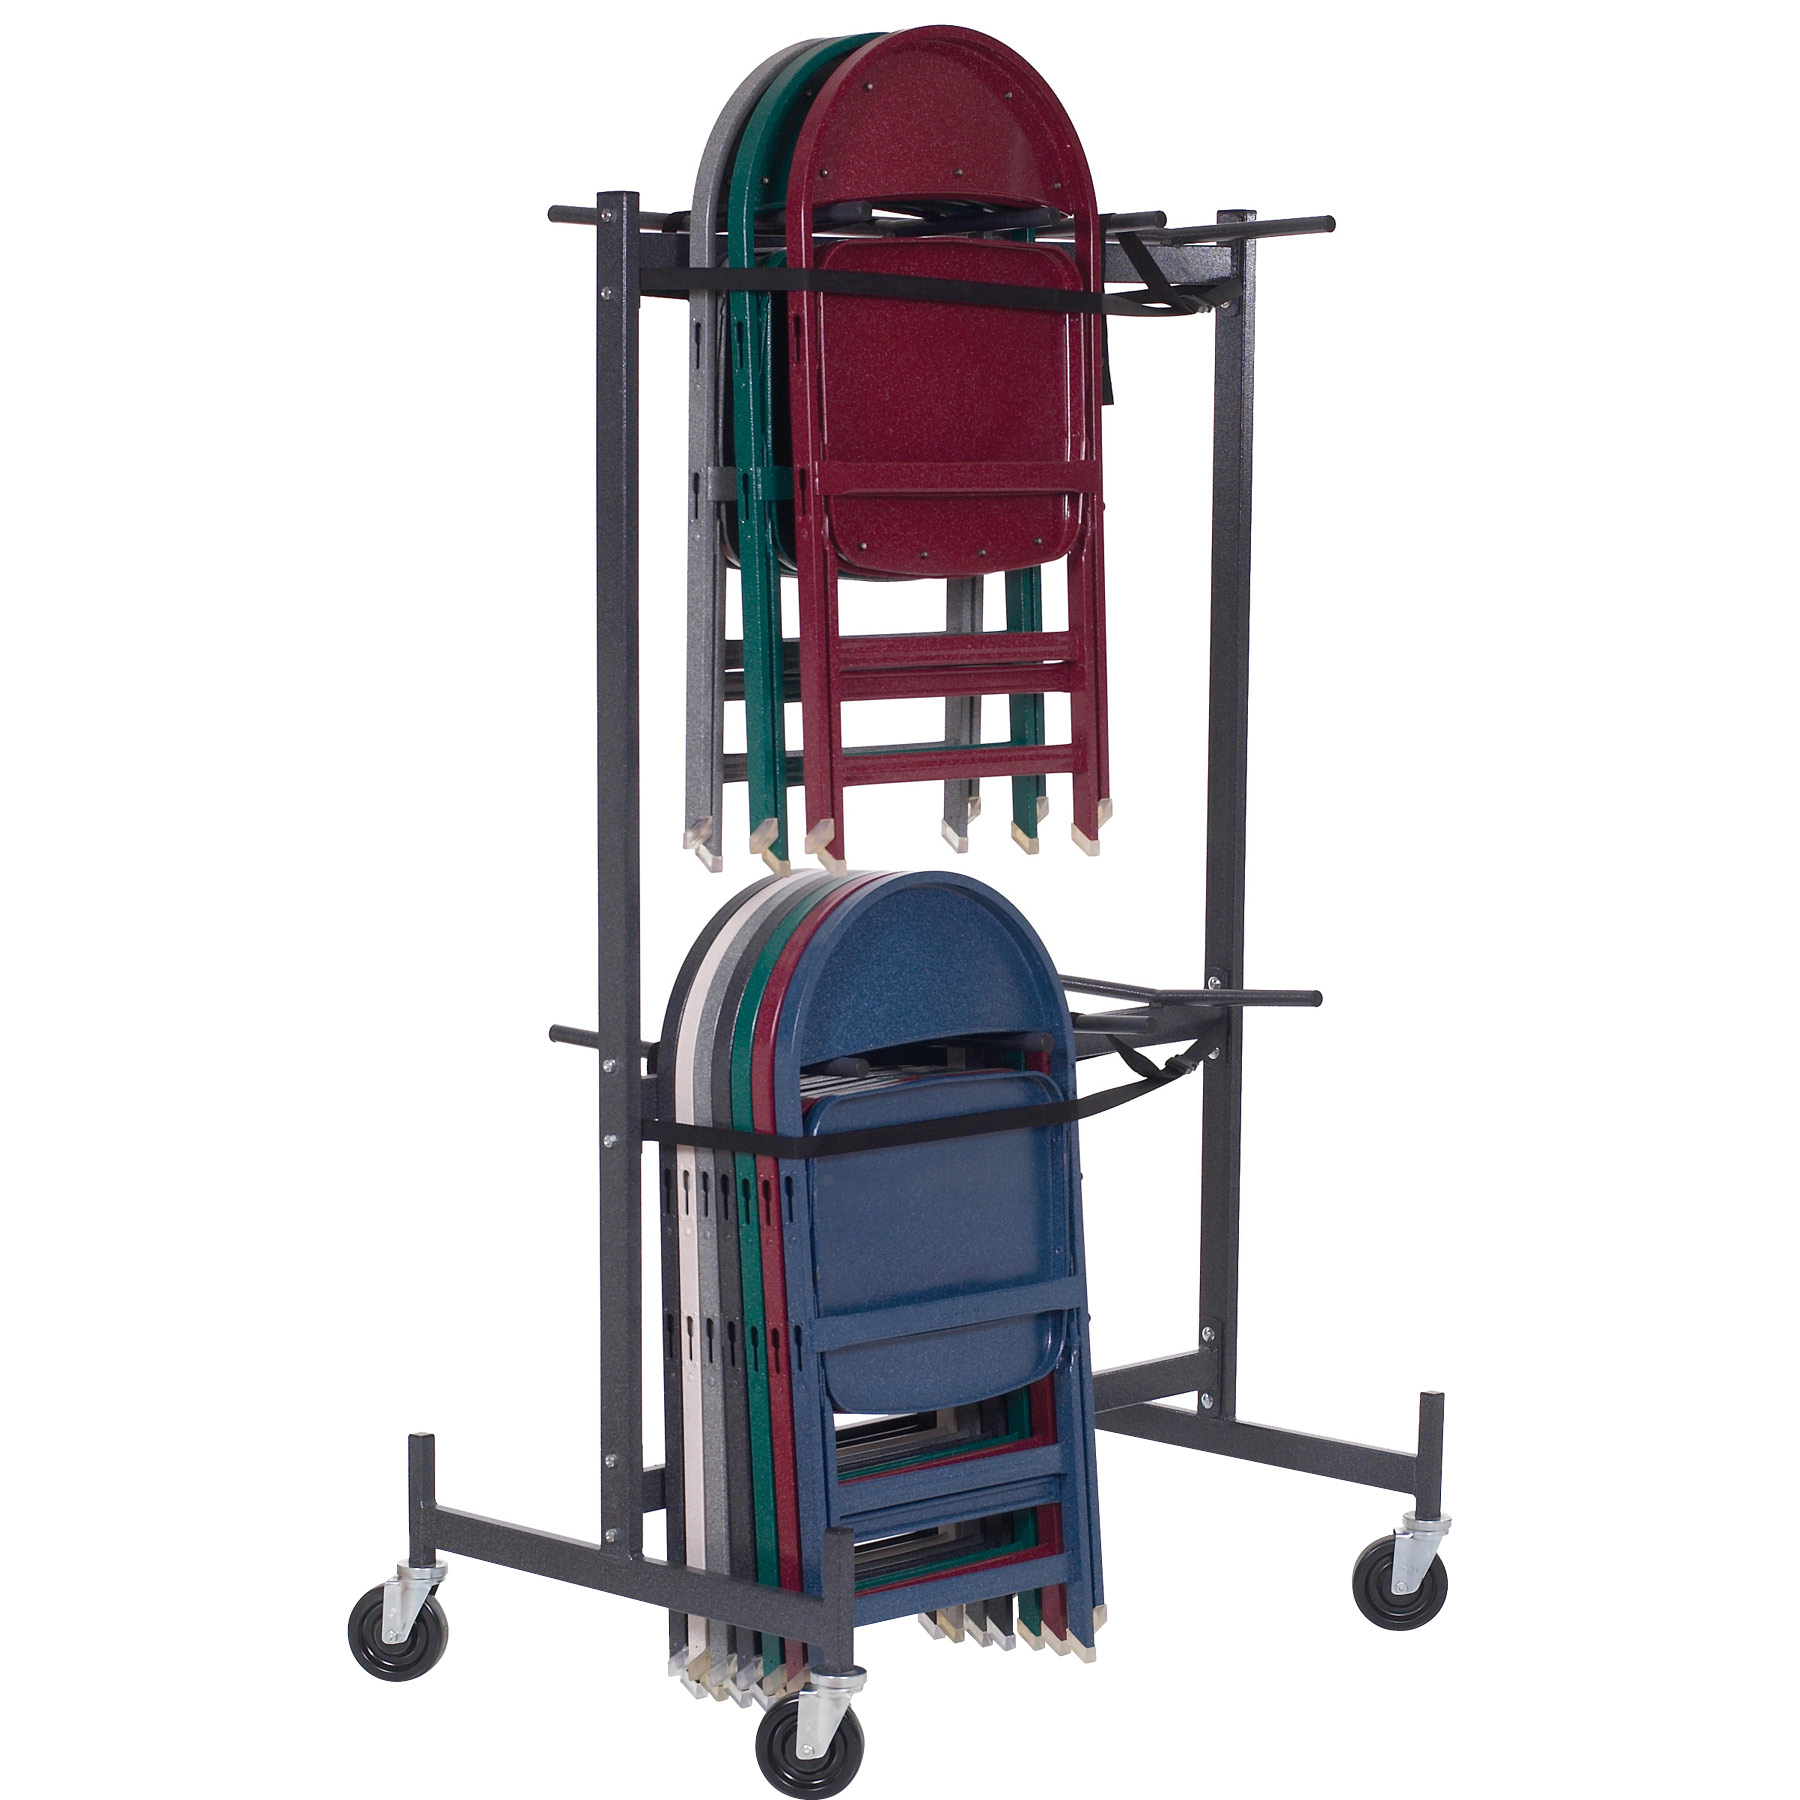 0033 Cart shown with 4237 Chairs